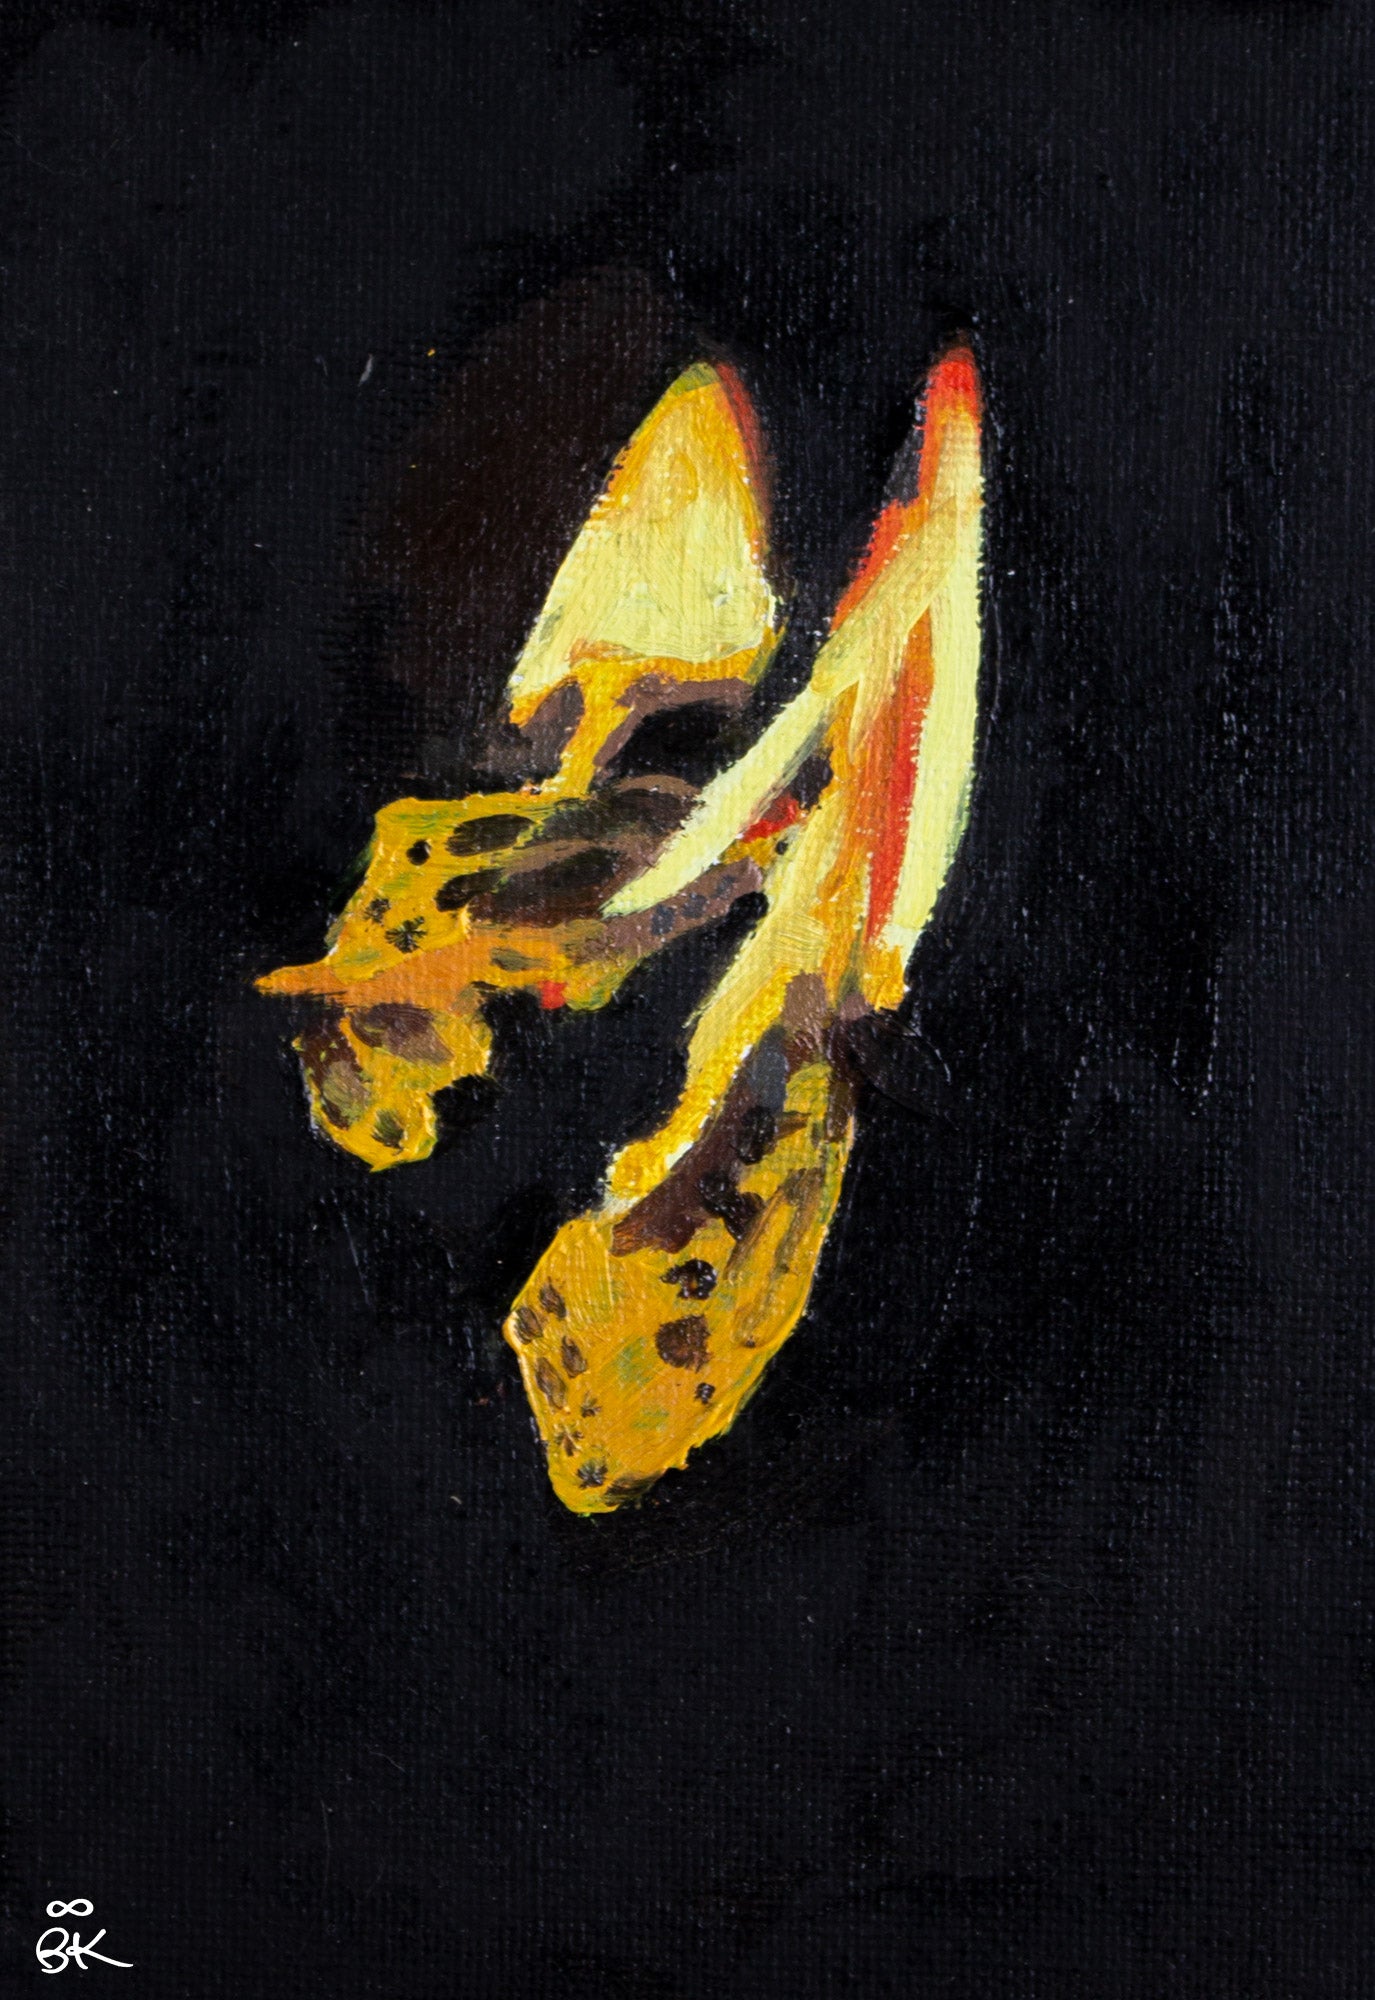 Eros' Burning Butterfly #1 - Original Oil Painting 5" x 7"